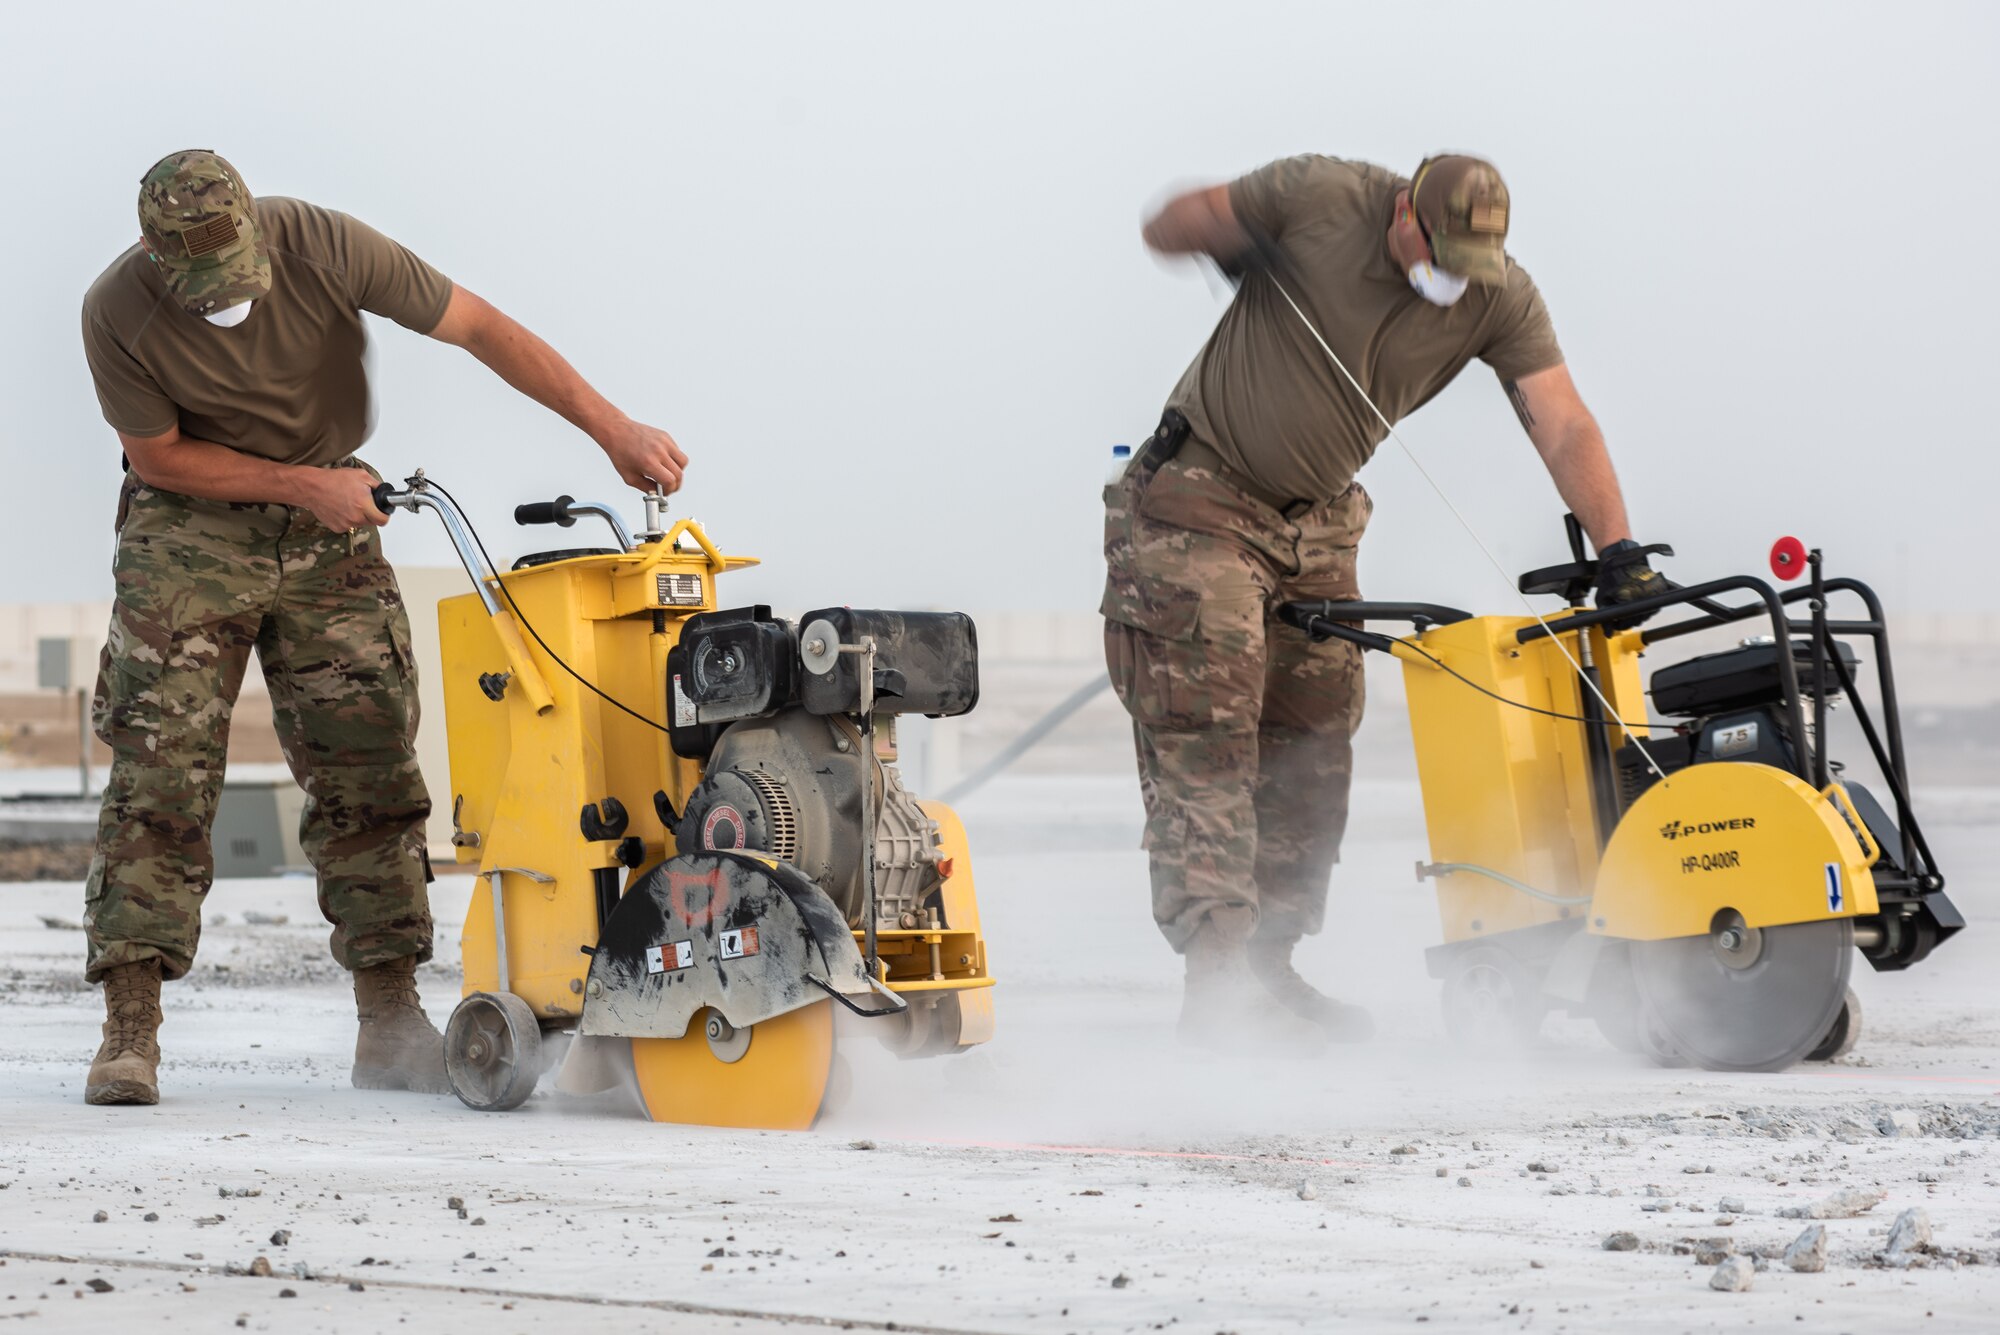 Two 380th Expeditionary Civil Engineer Squadron water and fuels technicians cut concrete during a rapid airfield damage repair exercise July 26, 2019, at Al Dhafra Air Base, United Arab Emirates. By cutting the concrete it can be broken up and removed efficiently, leaving the hole to be filled with fast-curing concrete. (U.S. Air Force photo by Staff Sgt. Chris Thornbury)